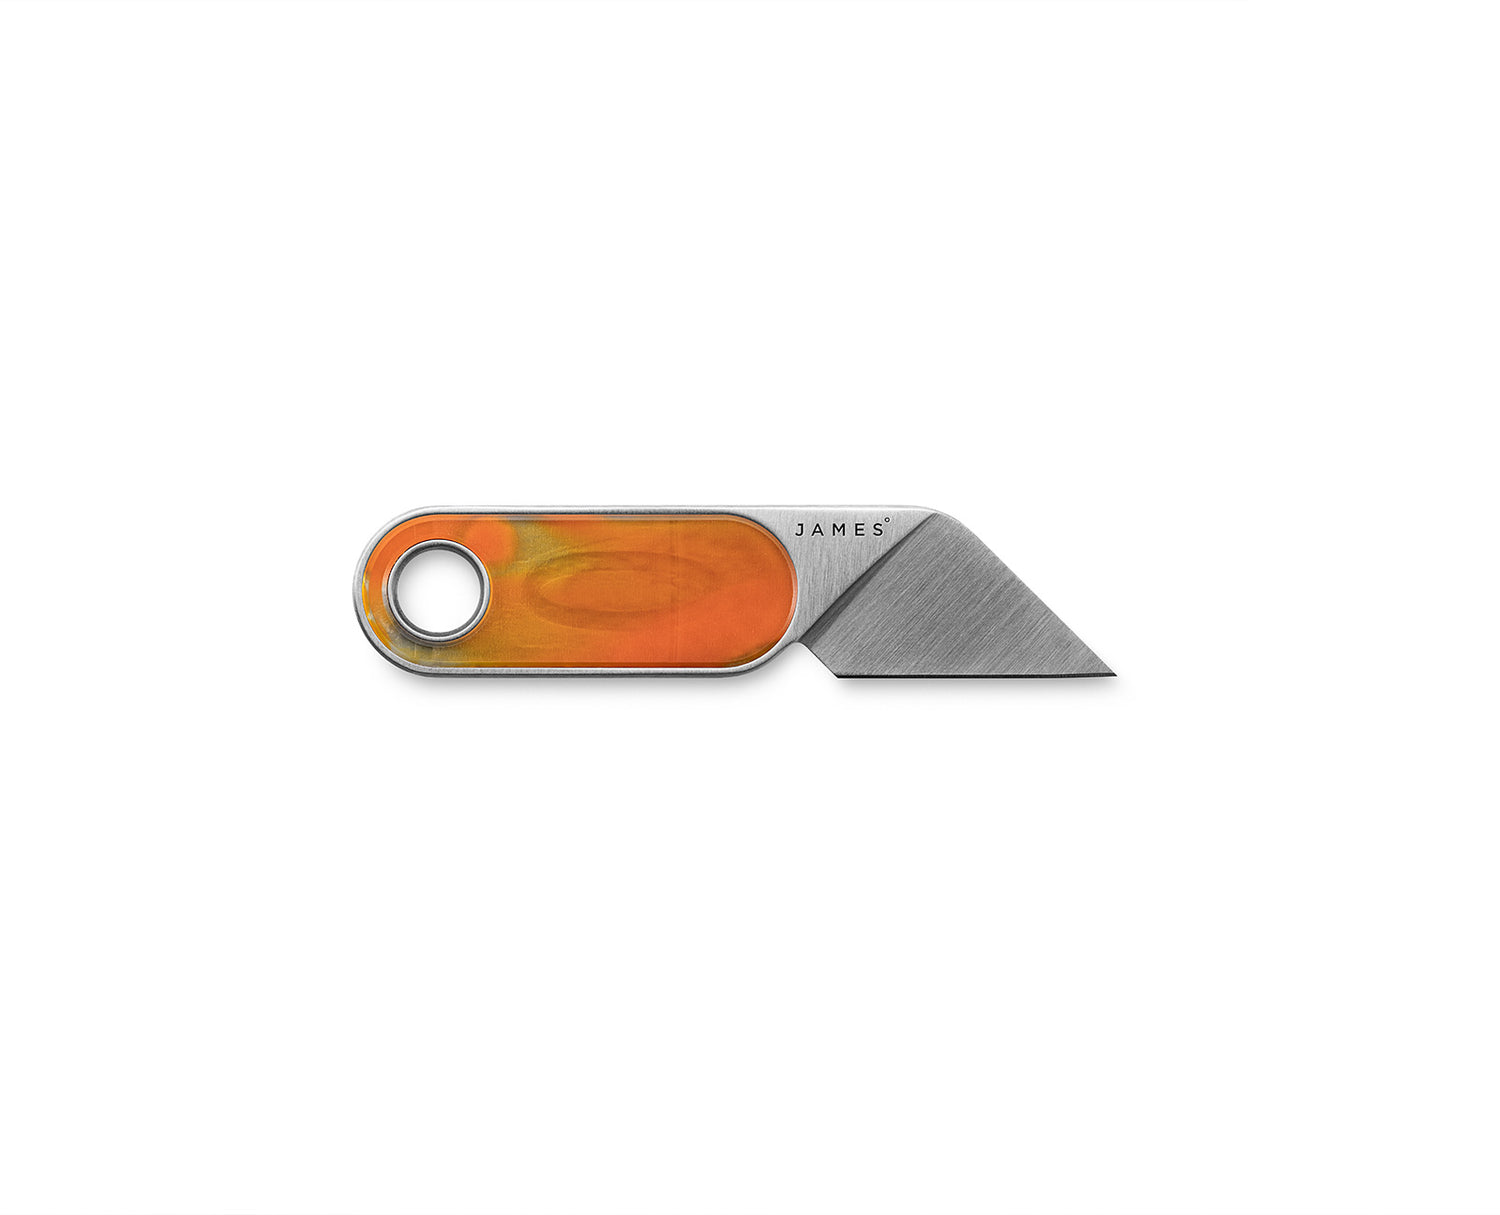 The Abbey knife with tie dye orange handle and stainless steel blade.